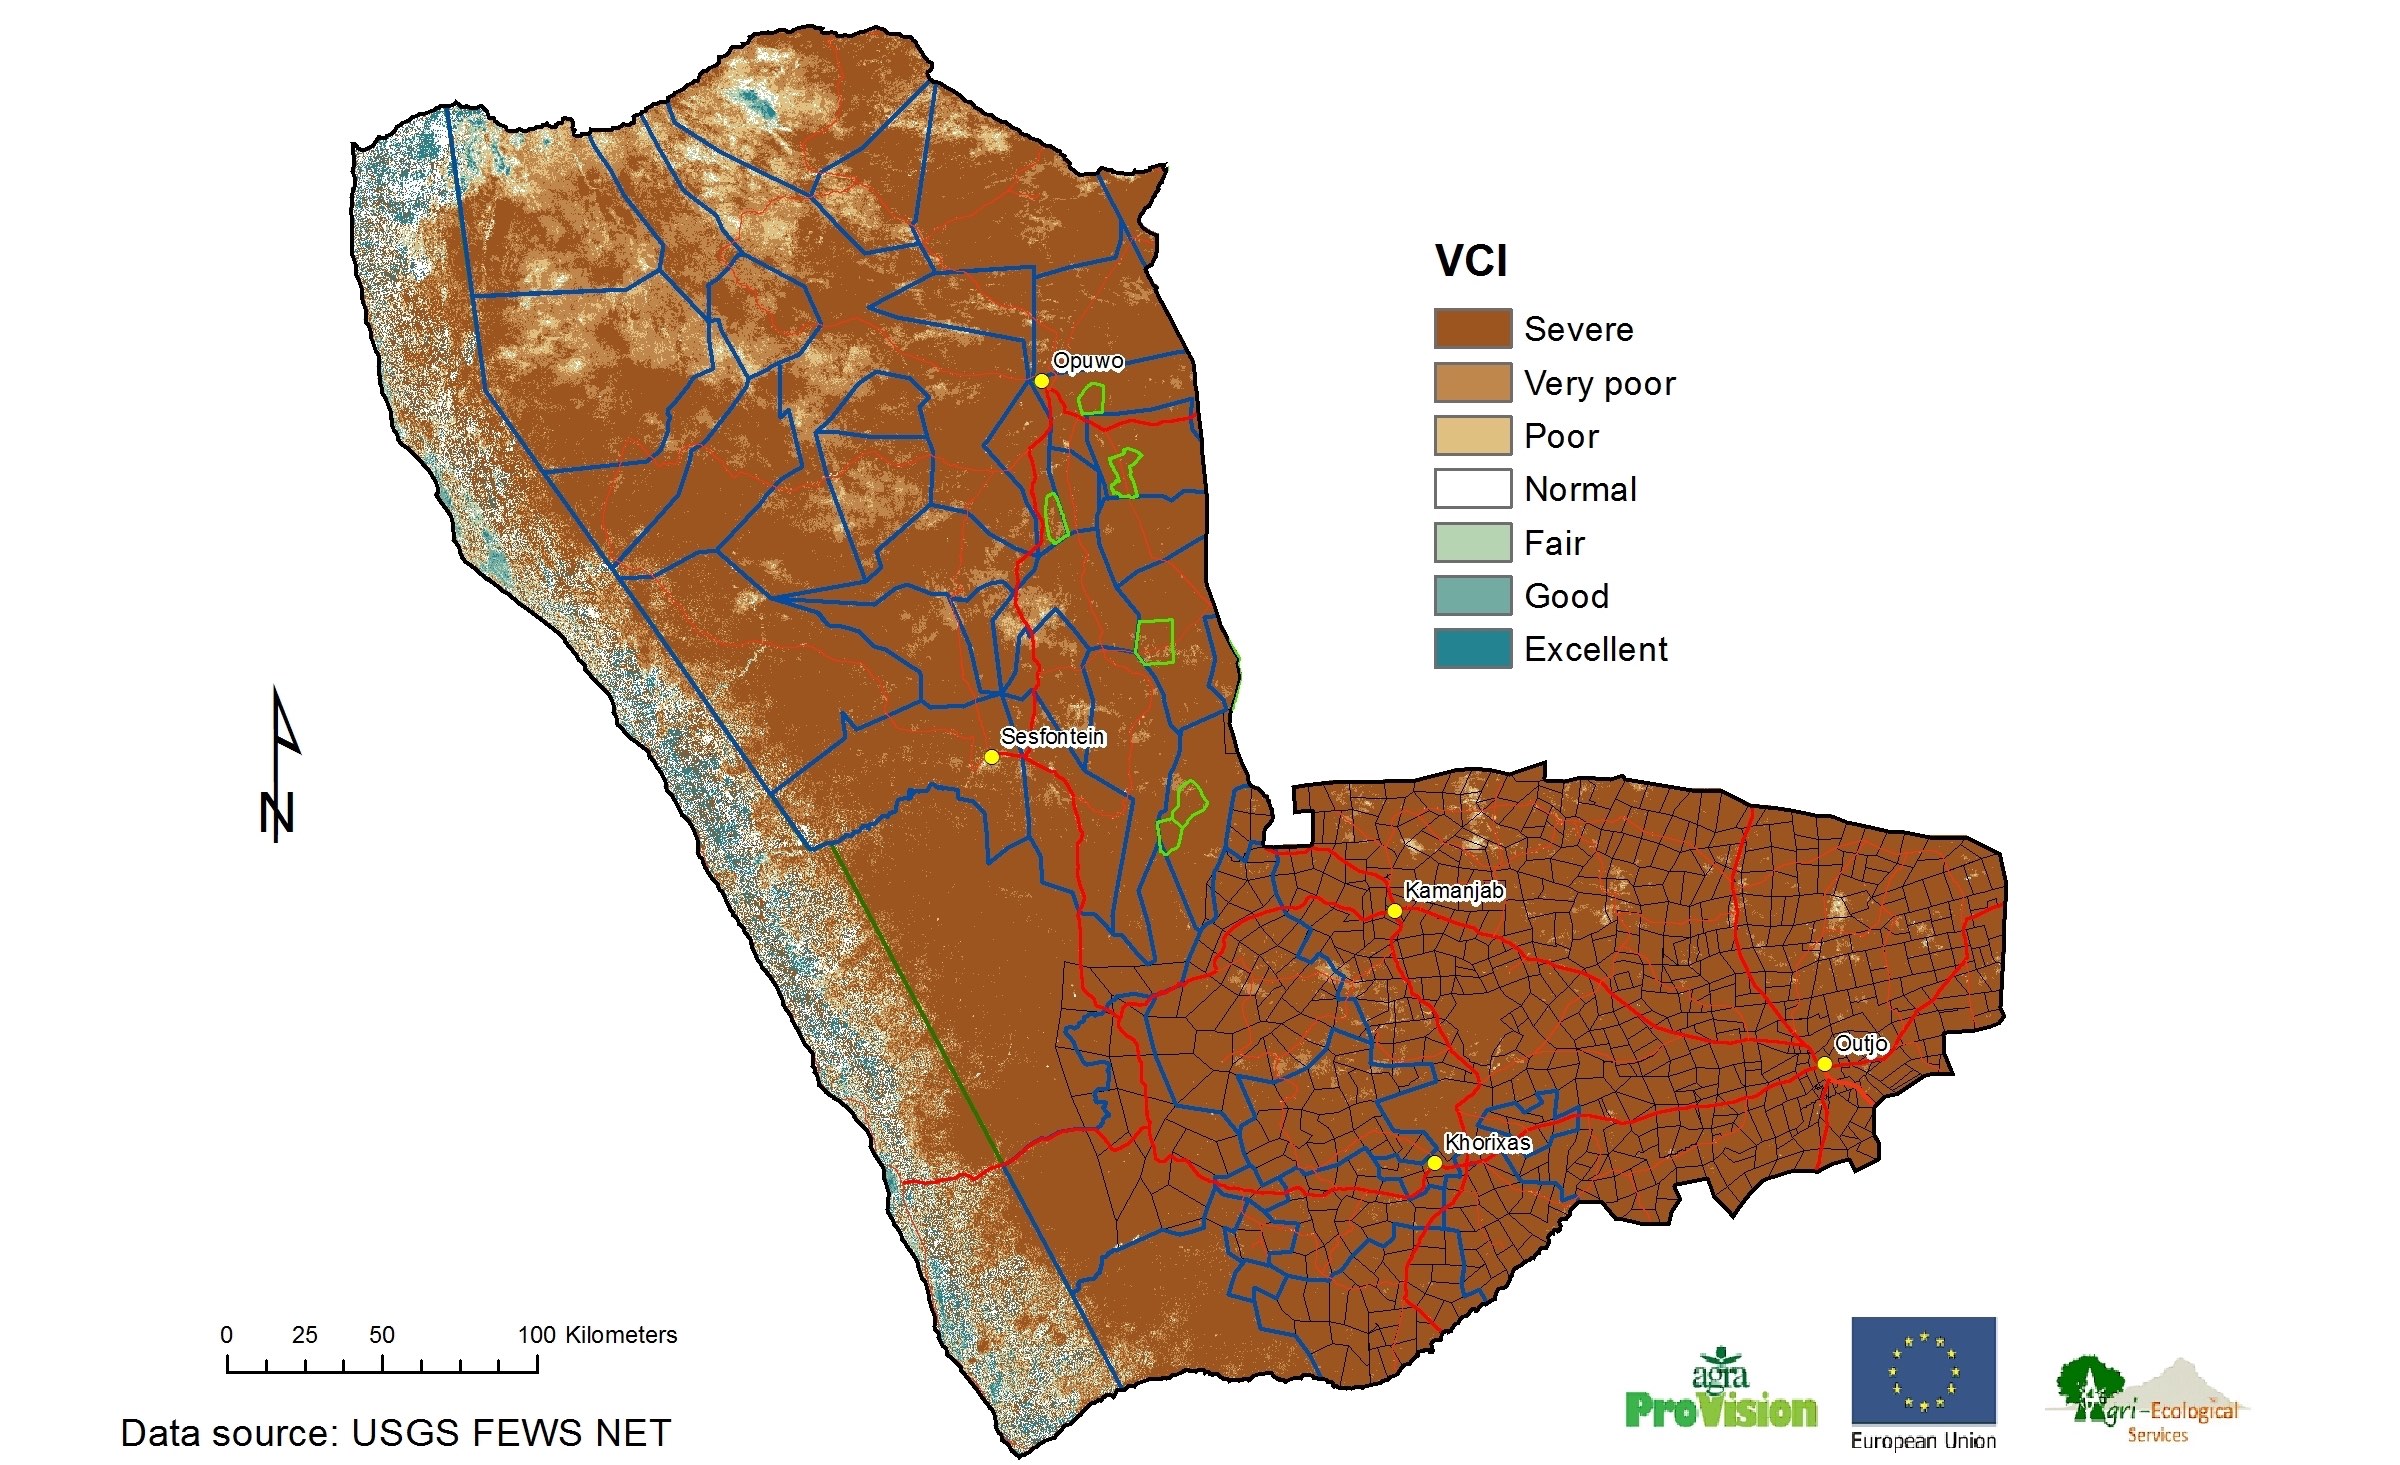 A map/chart of the Kunene region showing the status of vegetation cover. Virtually the entire region is rated as Severe, which is the worst category.